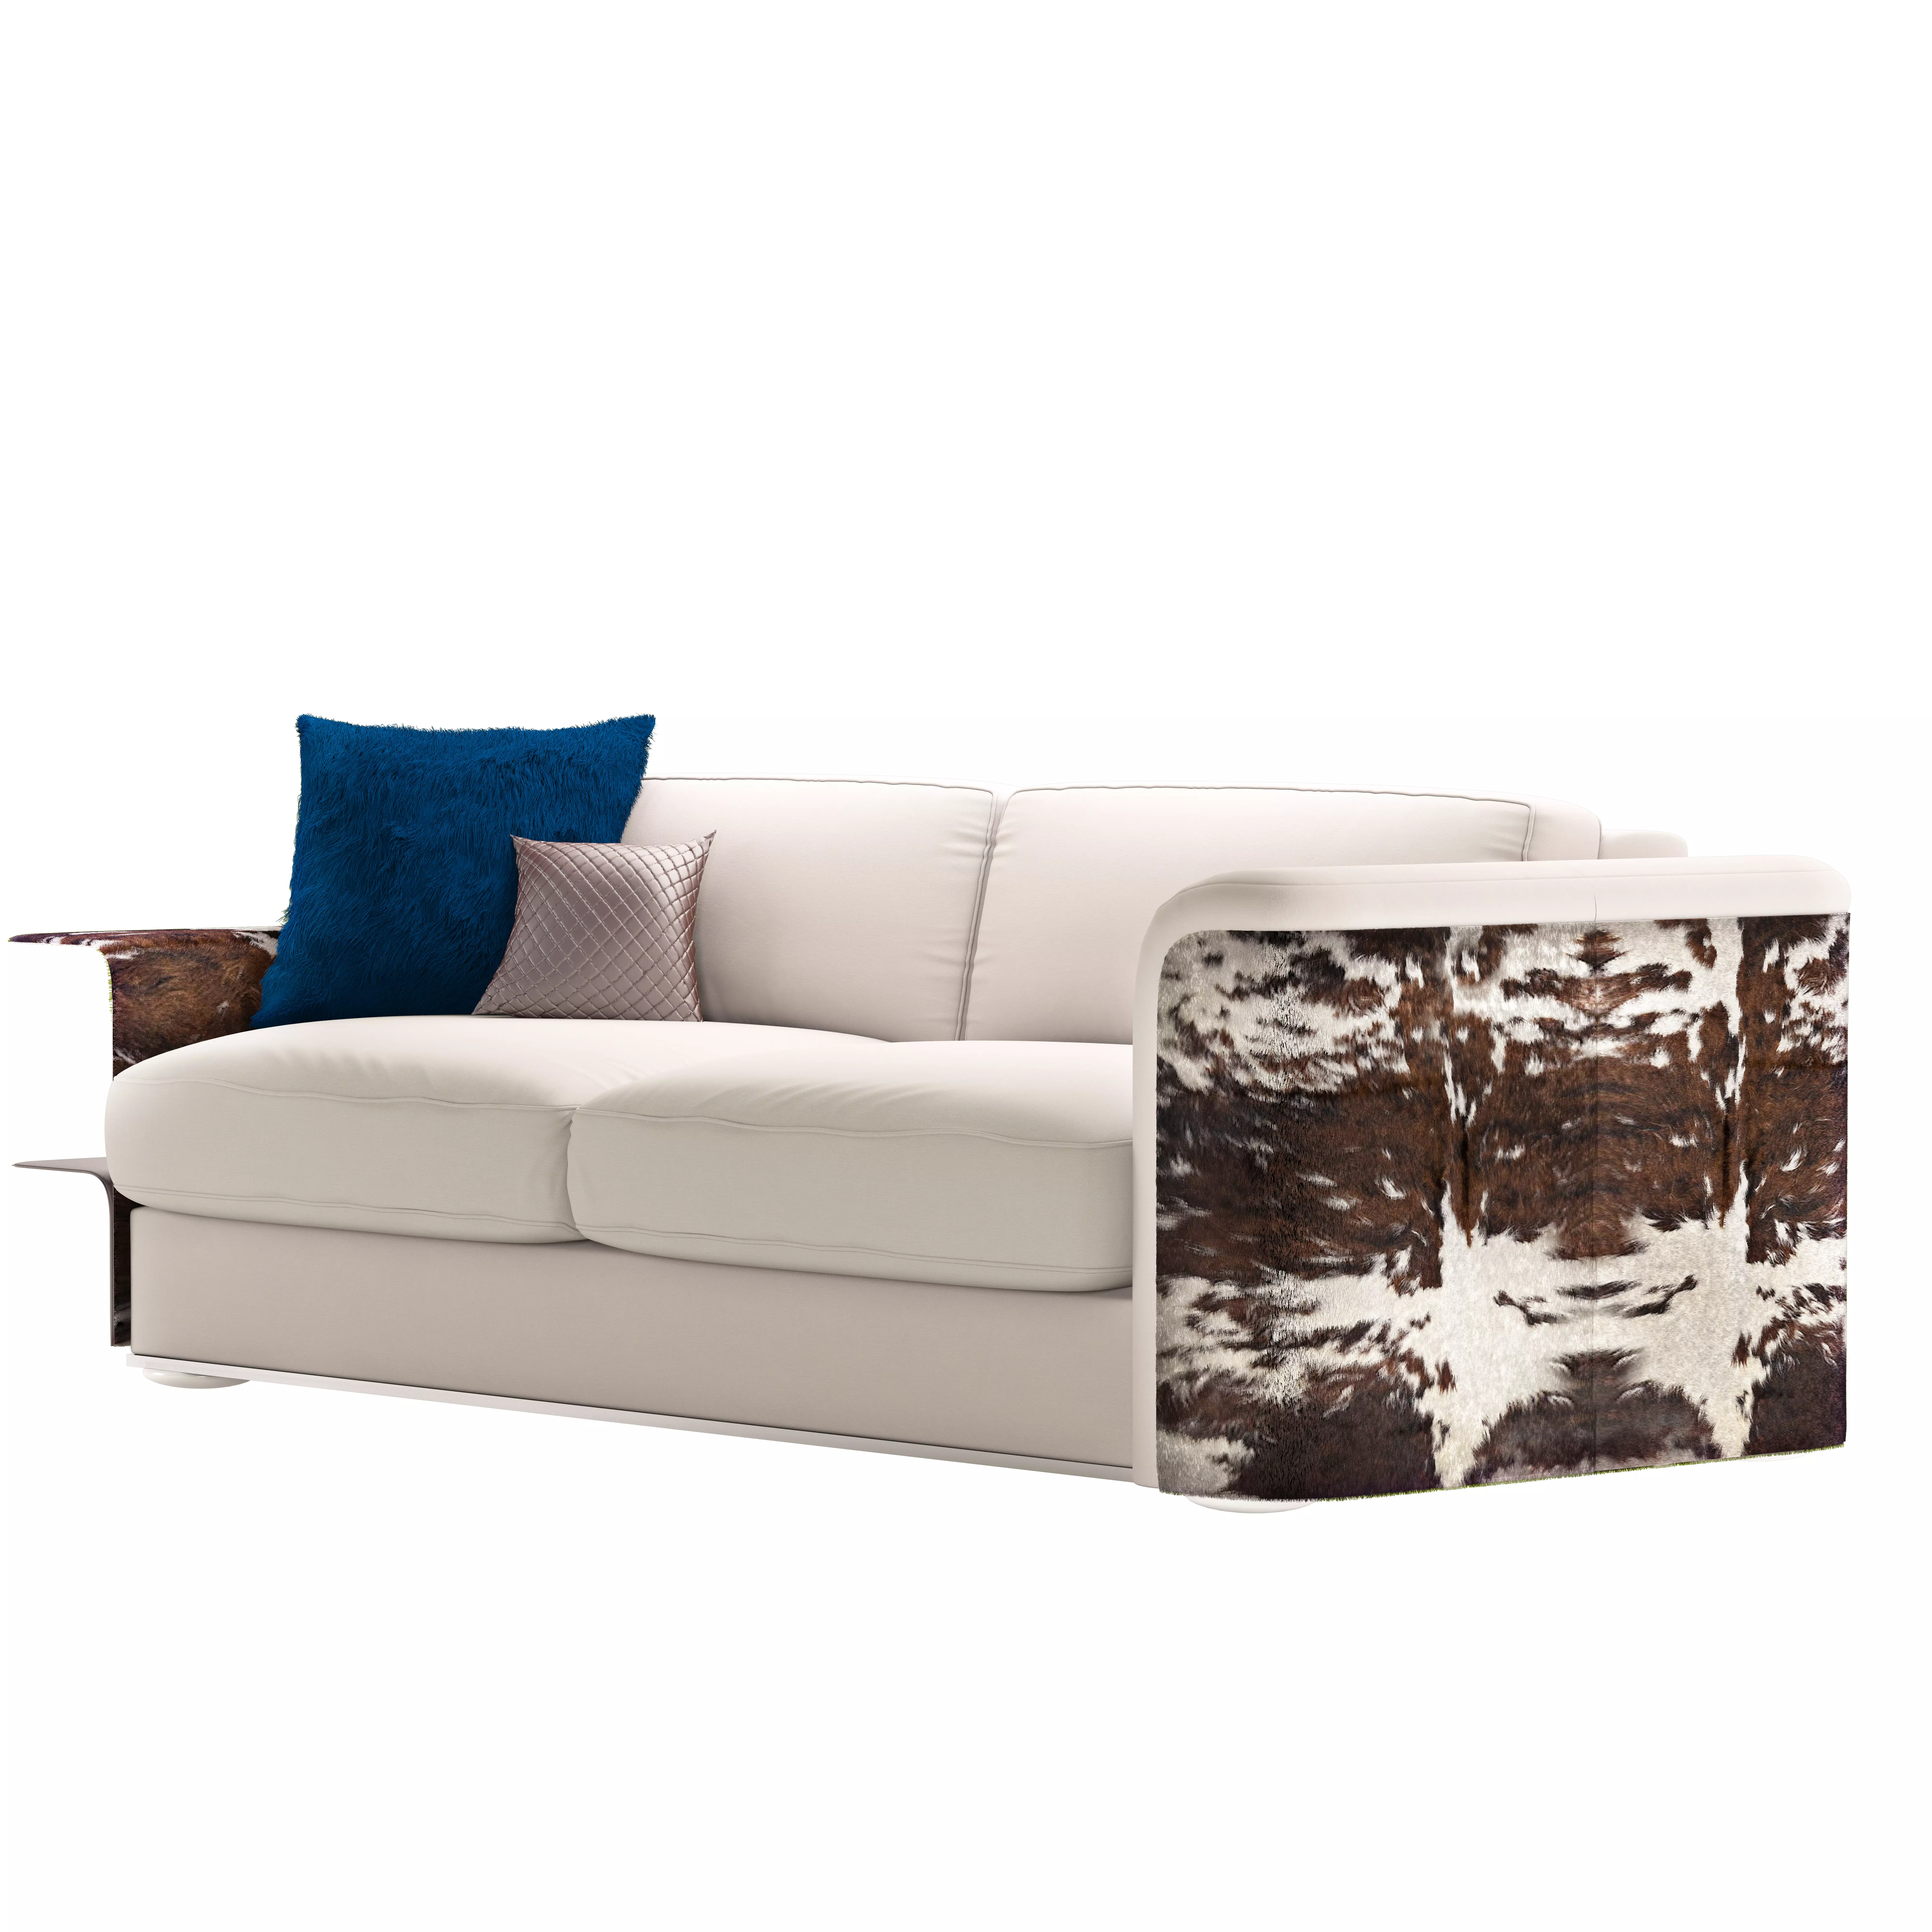 BUFFALO Seating Group will ventilate your home with its aesthetic design and details